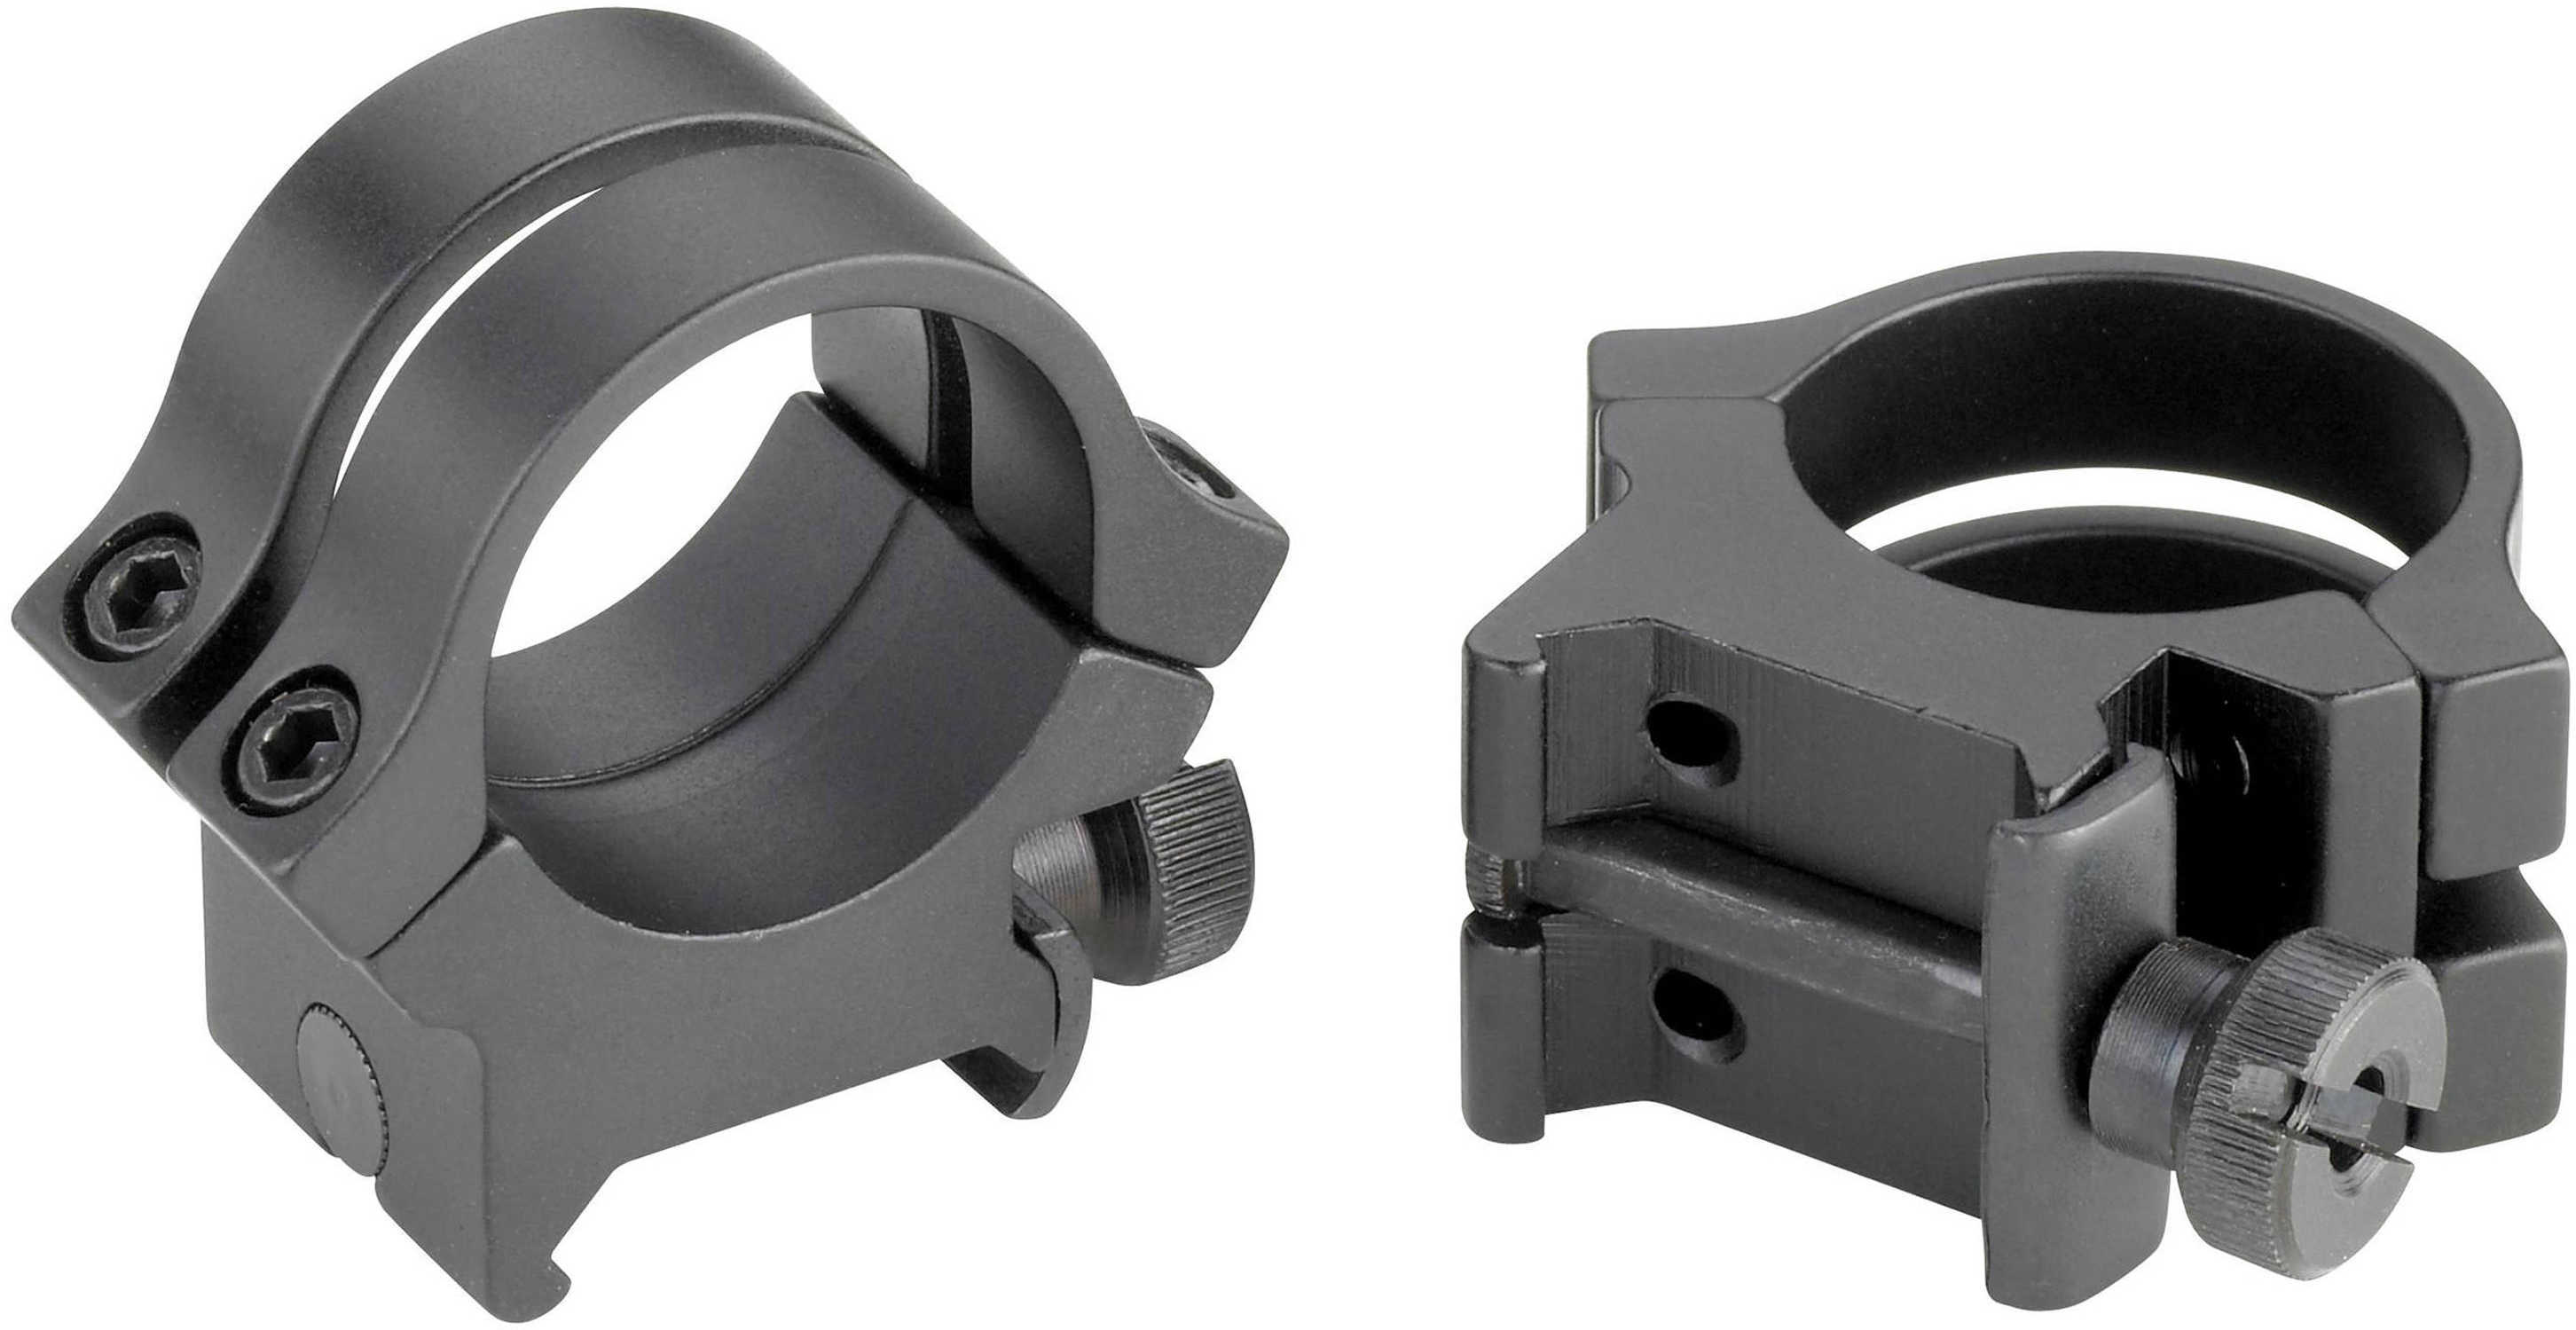 Simmons Weaver Extension Rings With Matte Black Finish Md: 49048